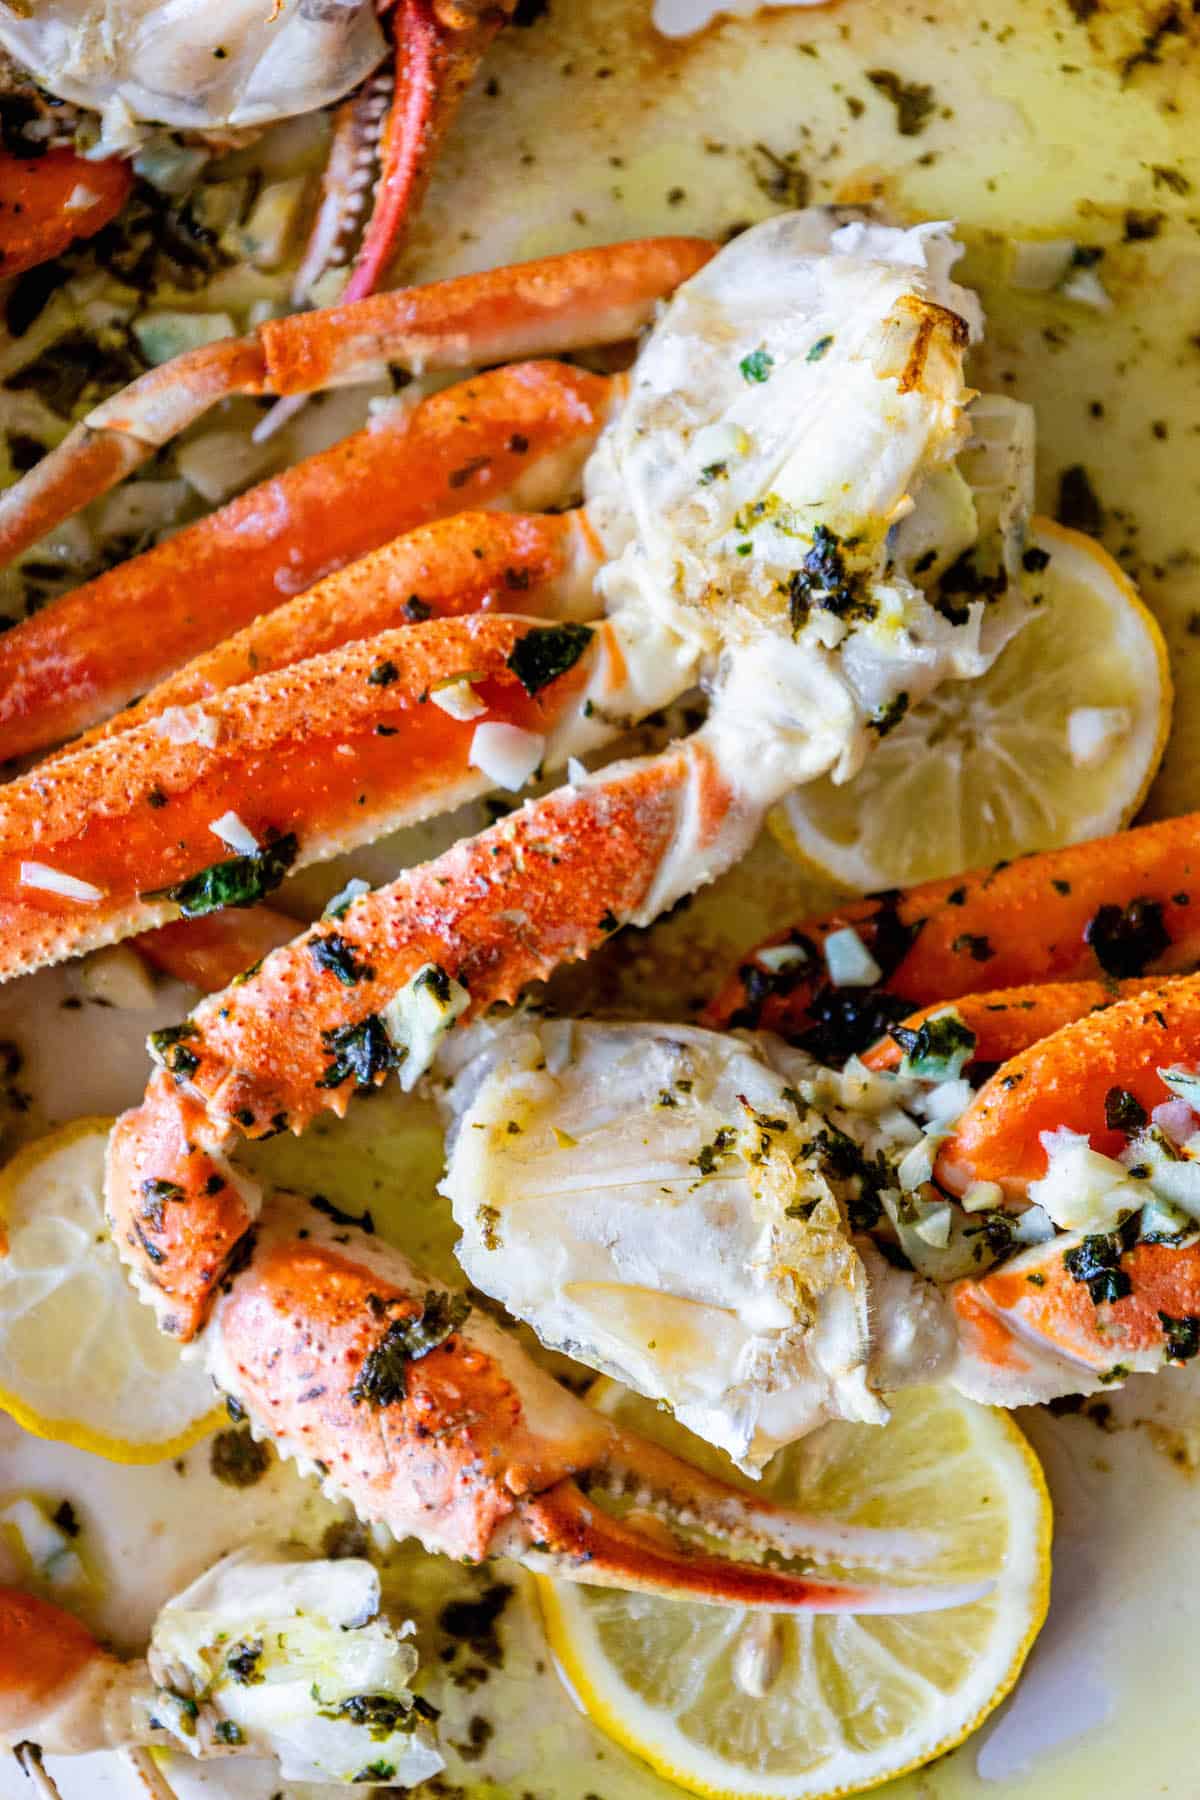 Baked Snow Crab Legs garnished with lemon and herbs.